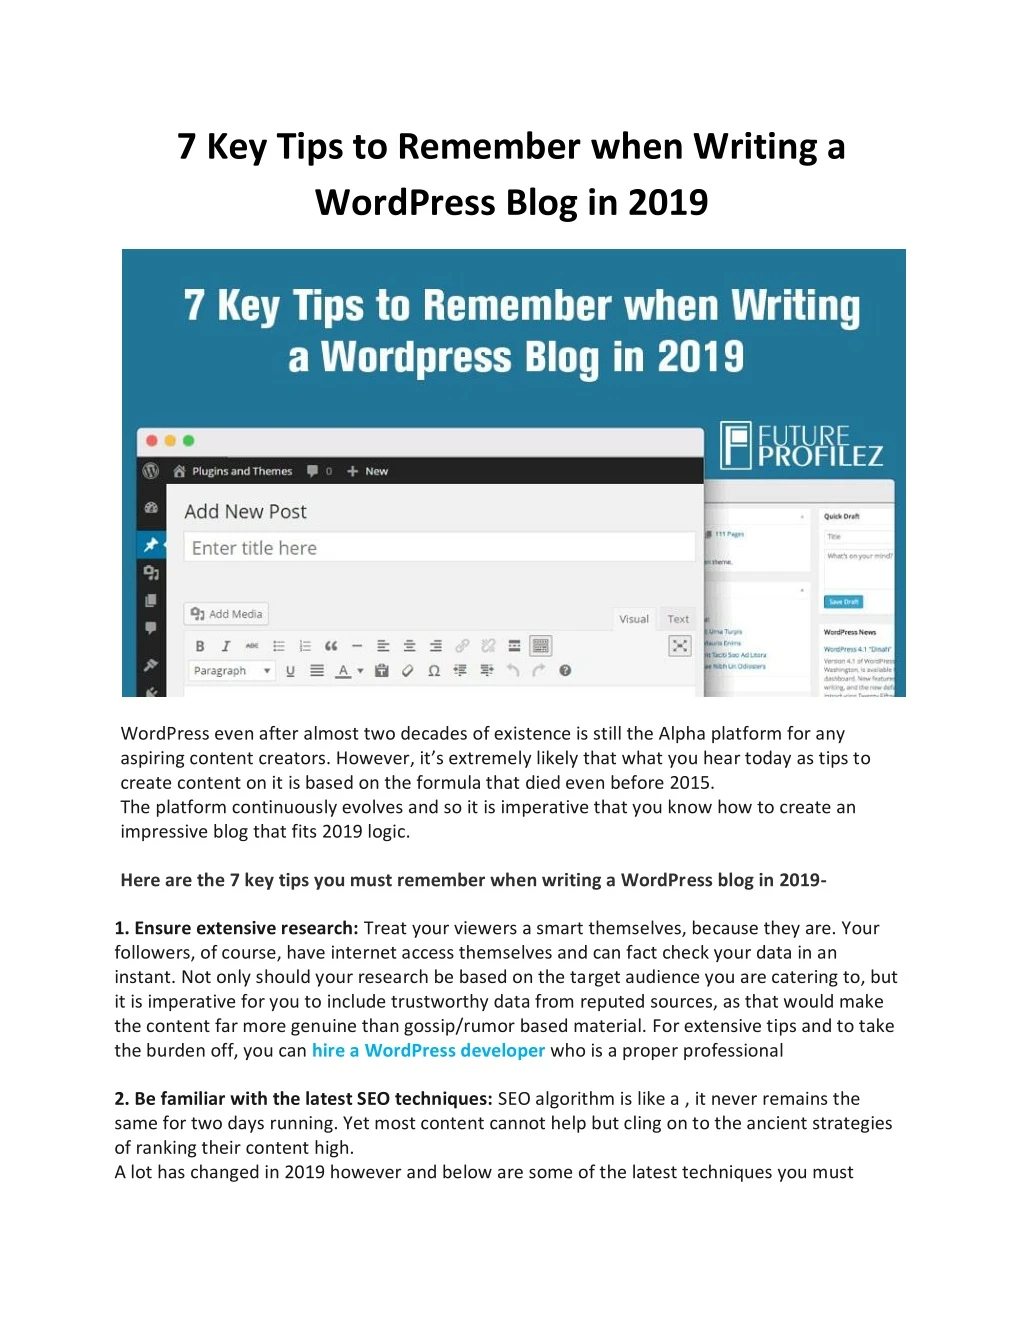 7 key tips to remember when writing a wordpress